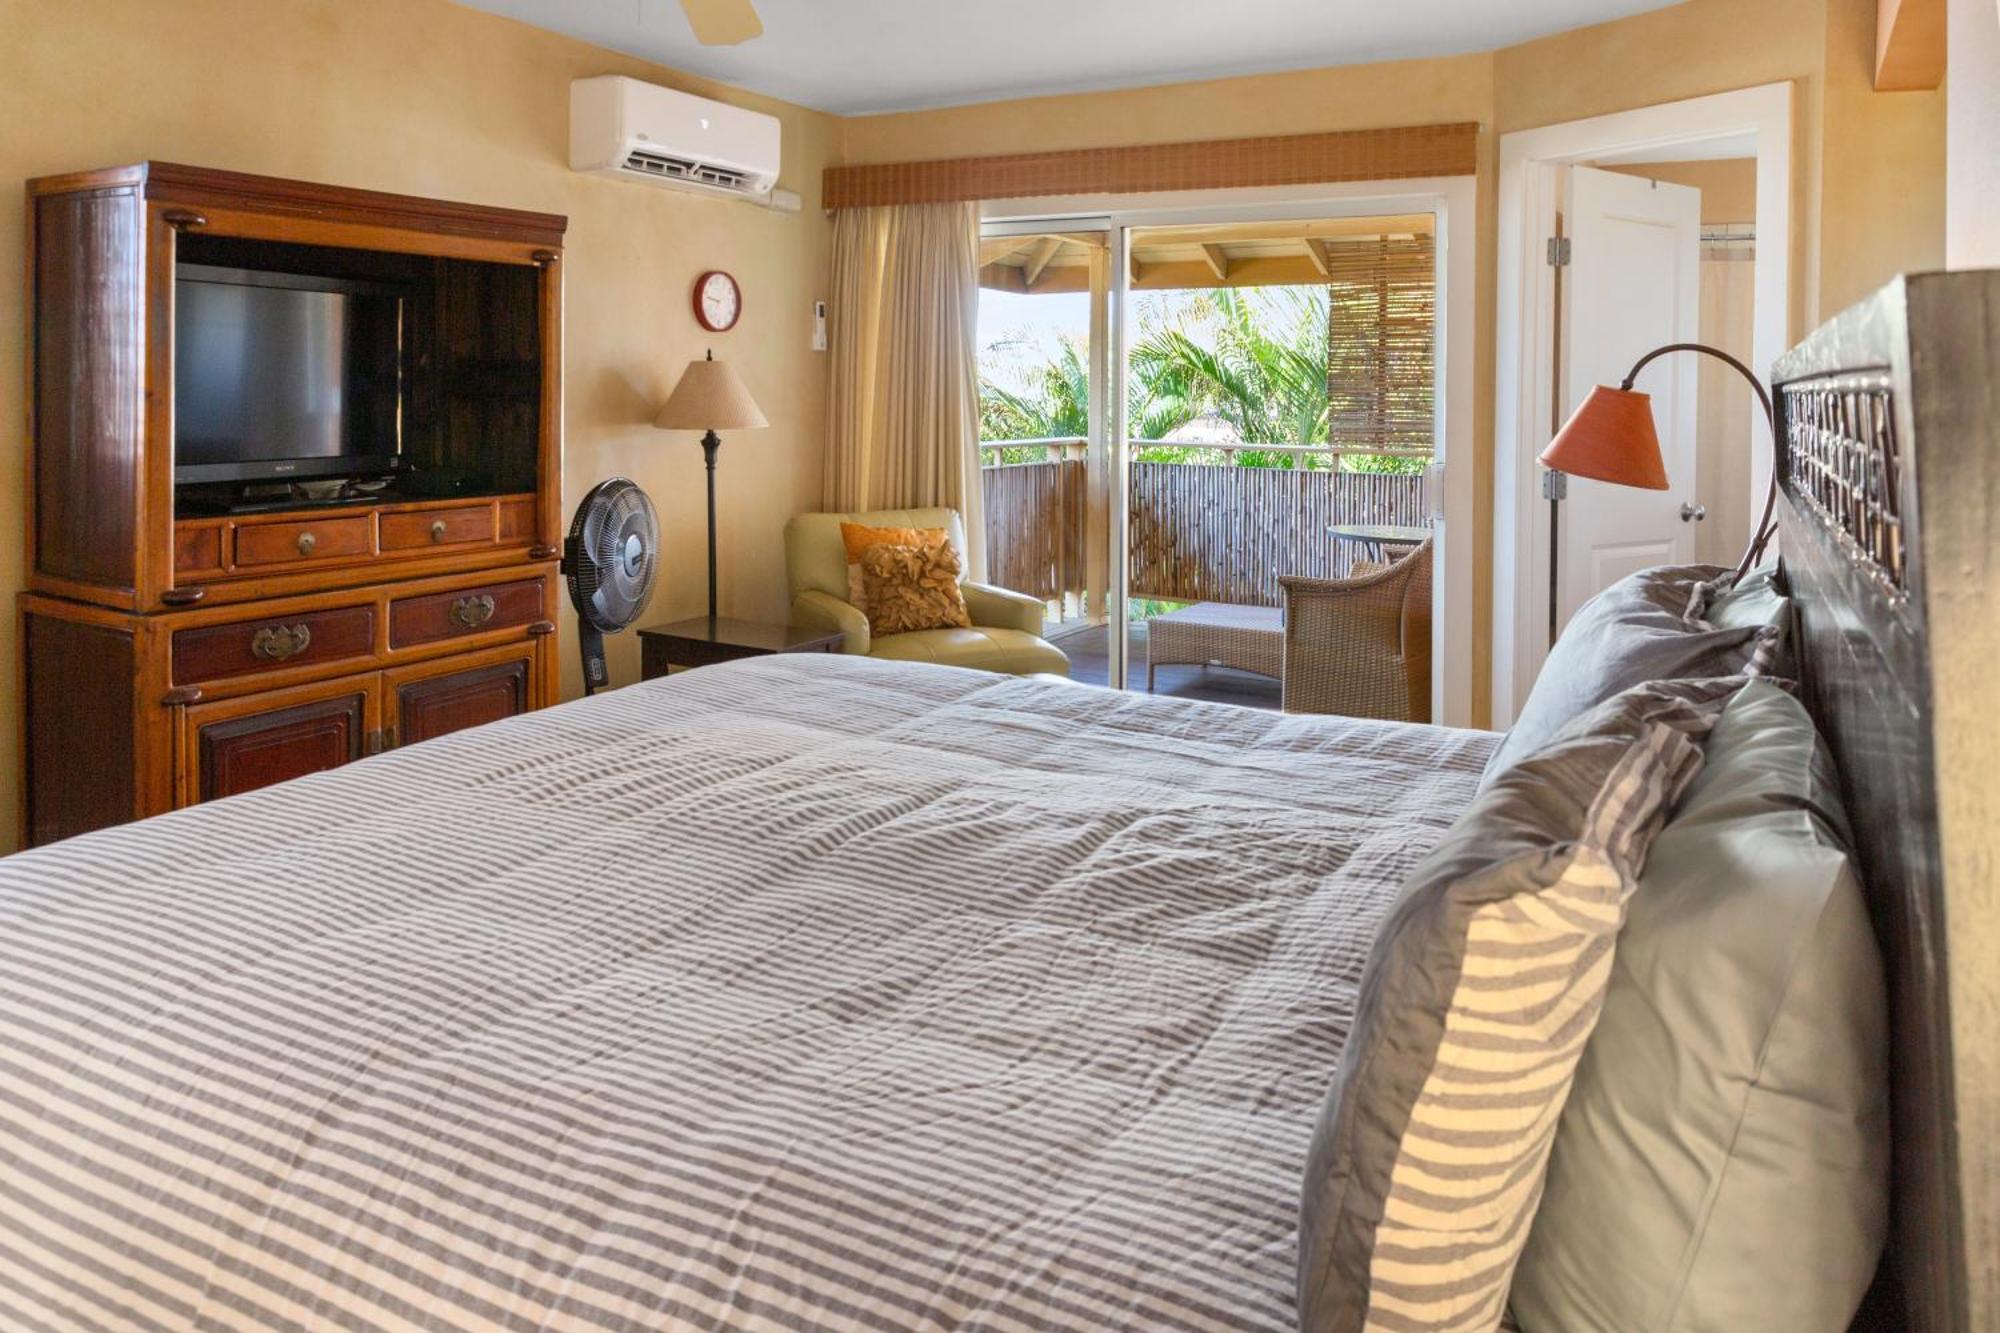 Orchid Suite In South Maui, Across From The Beach, 1 Bedroom Sleeps 4 คิเฮอิ ภายนอก รูปภาพ